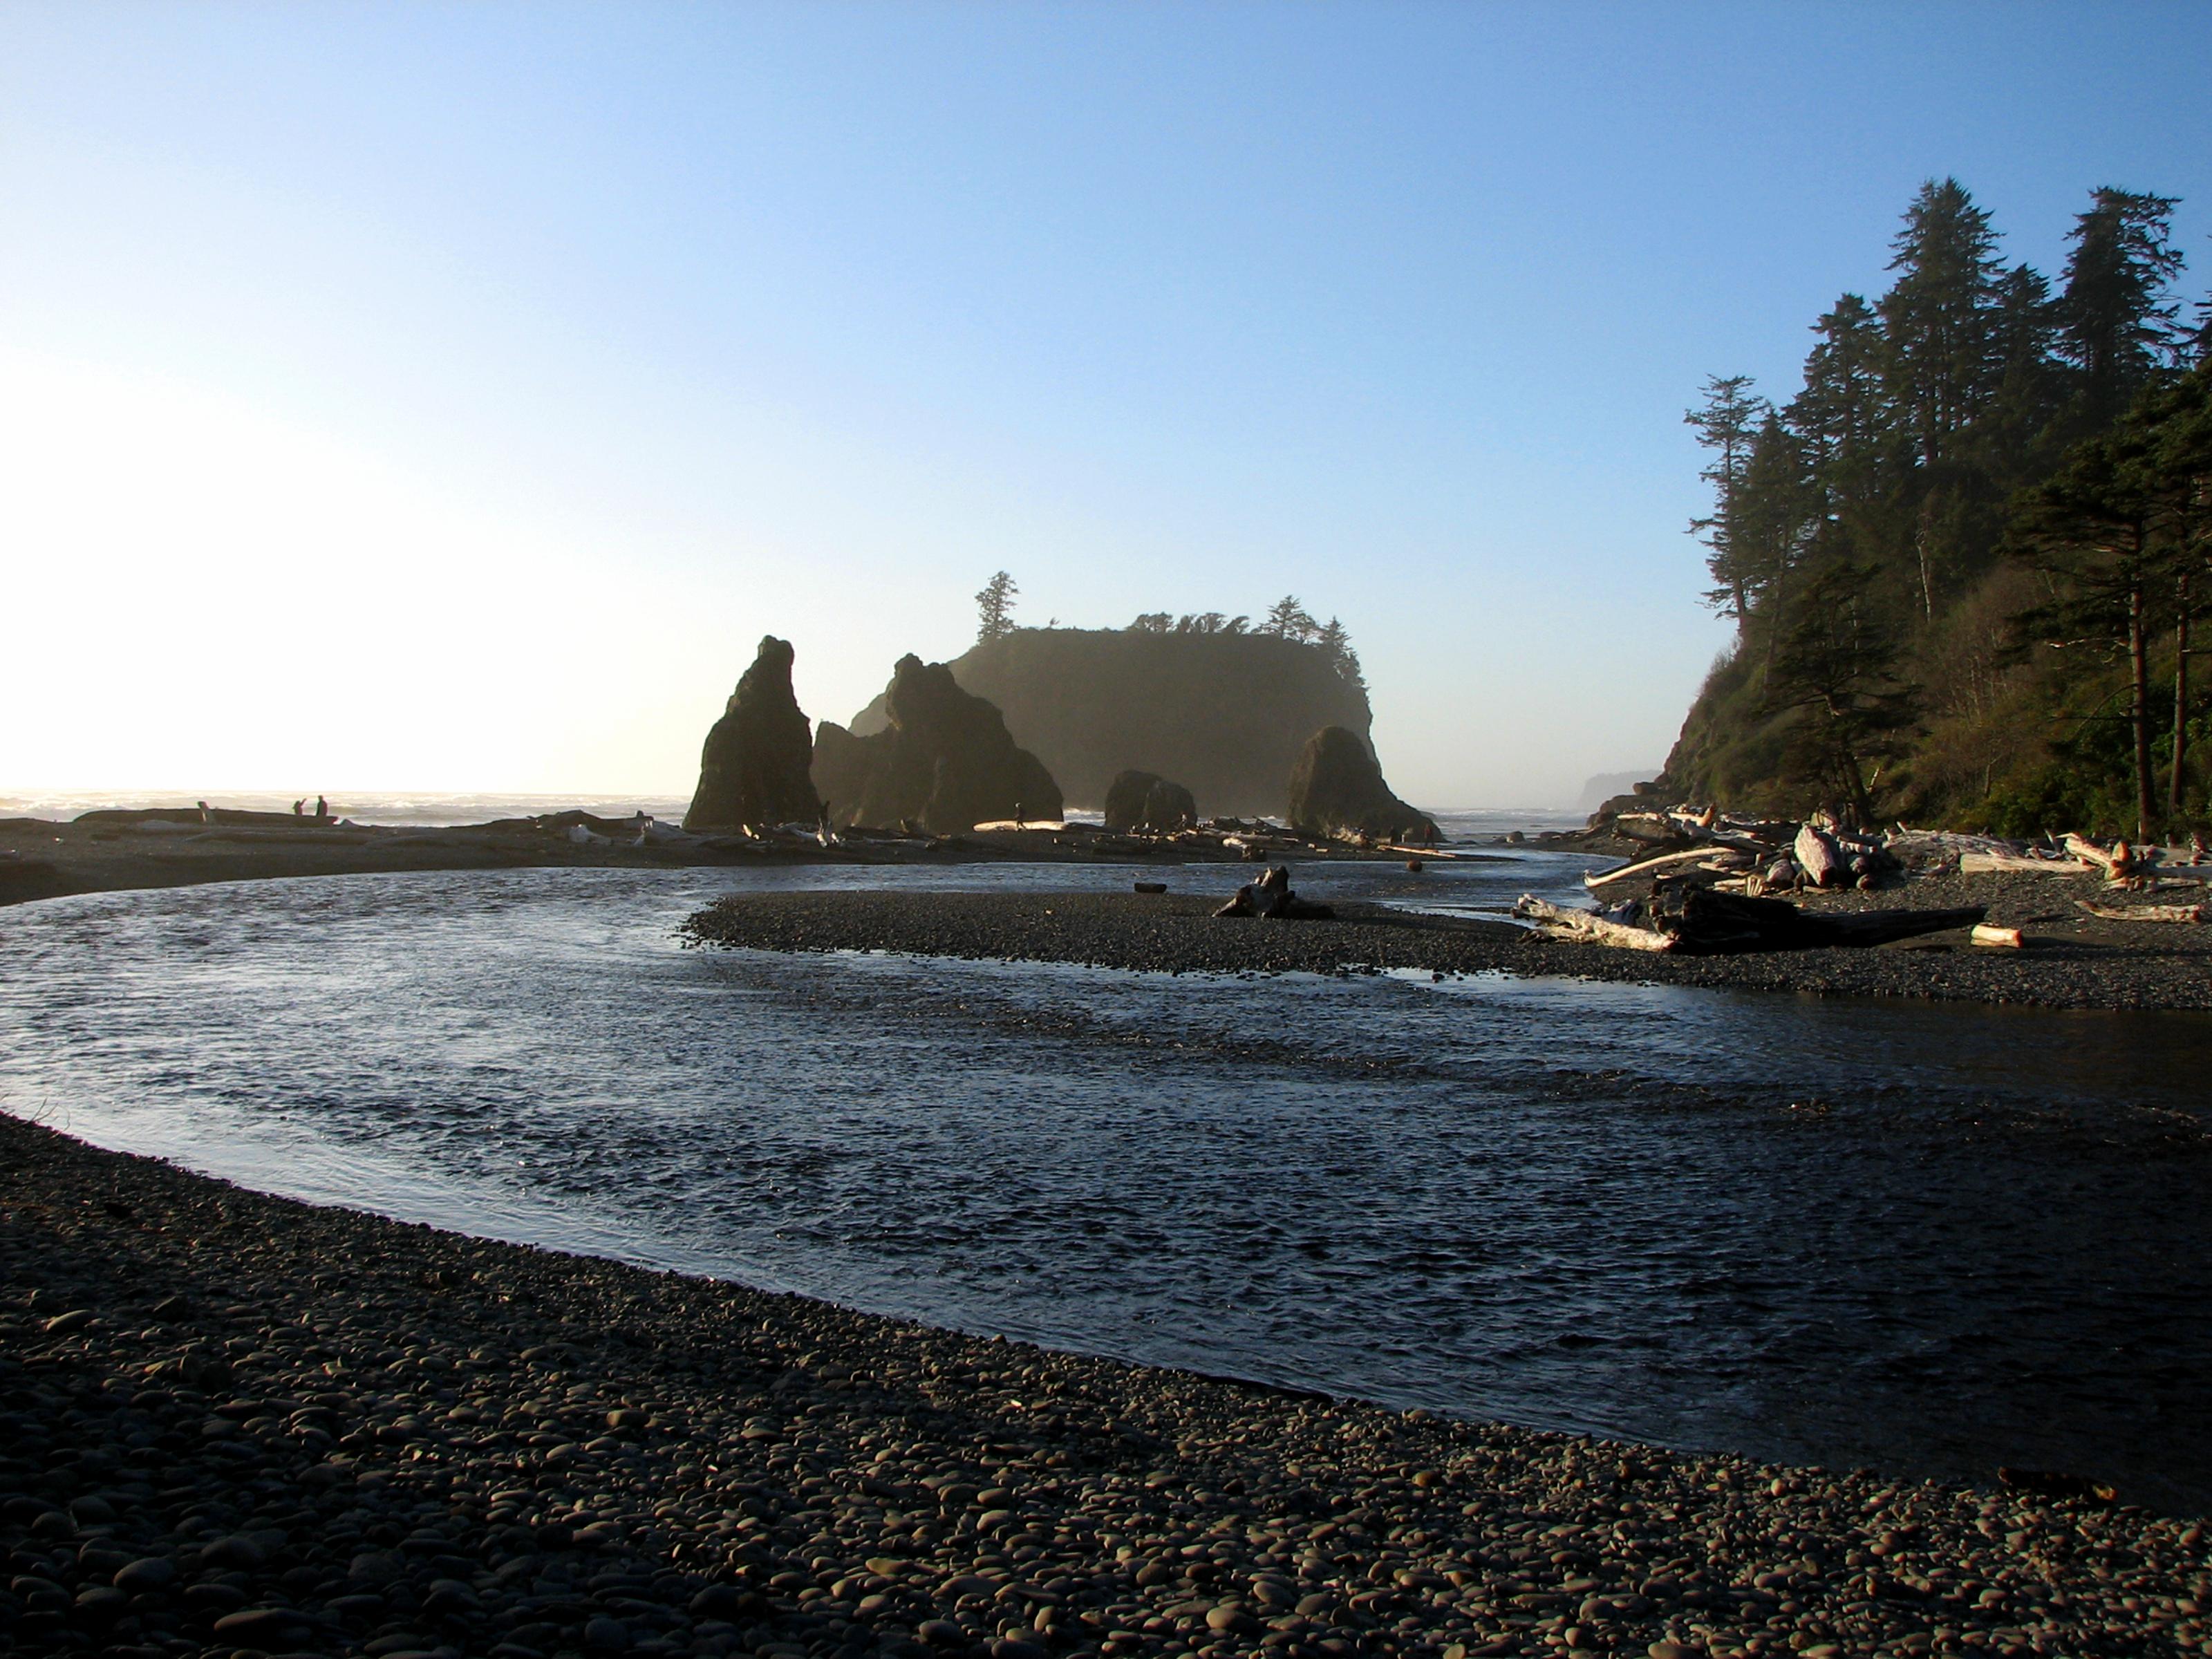 Morning at Ruby Beach, with a large sea stack, the blue Pacific Ocean, and a rocky beach covered with driftwood.